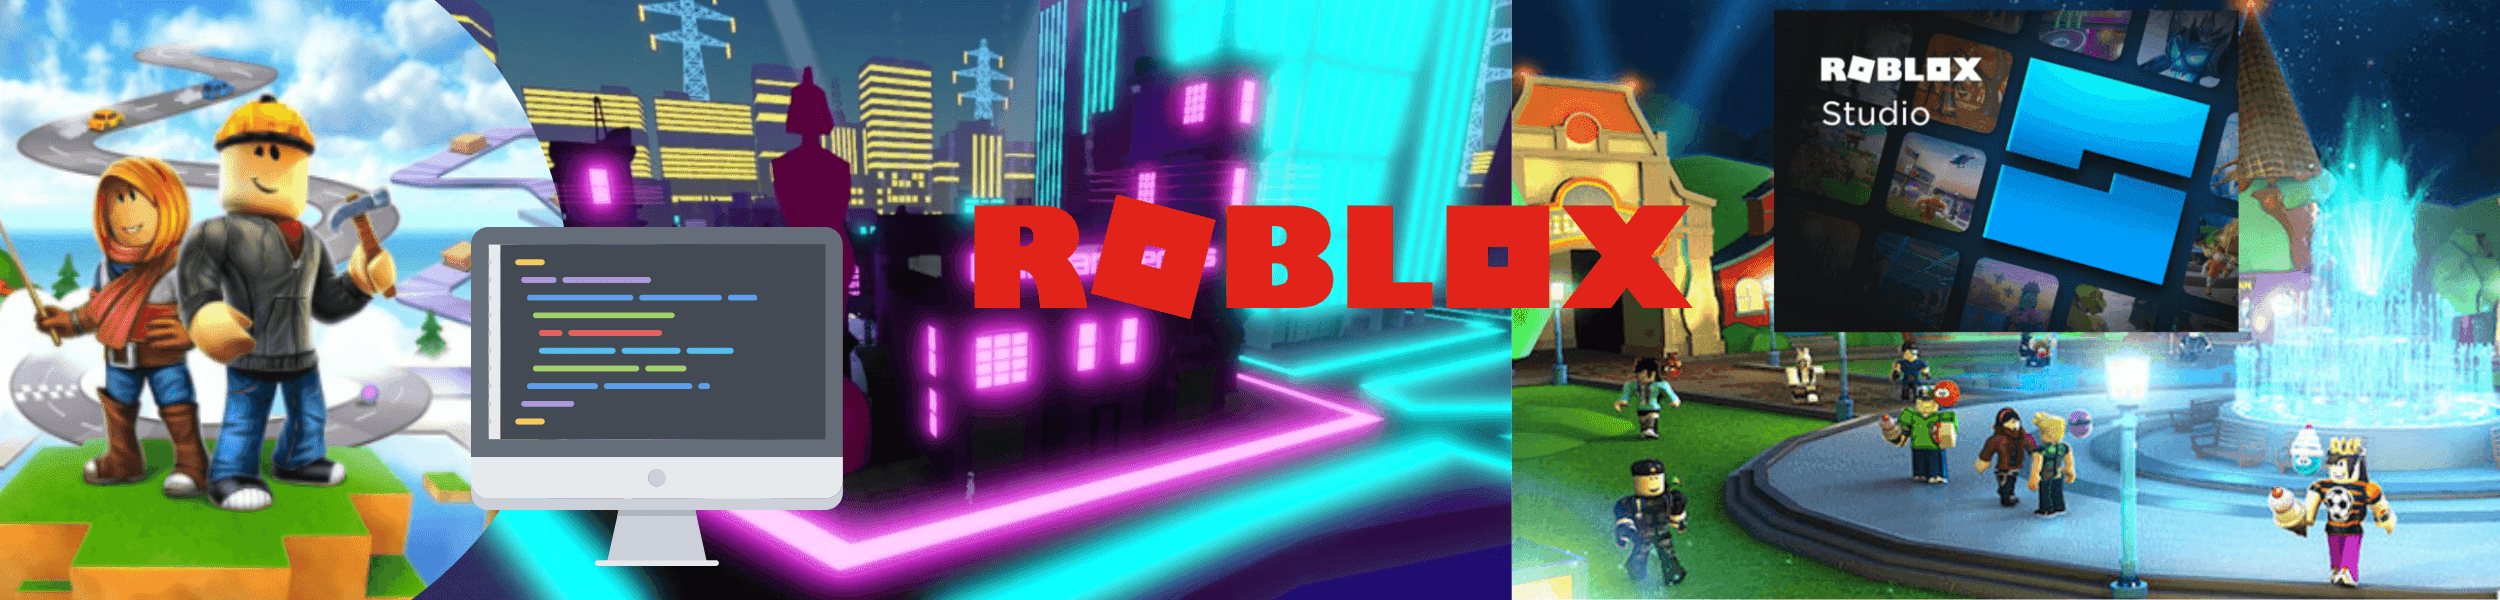 Free Roblox Class for Kids: 5-Star Rated - Create & Learn